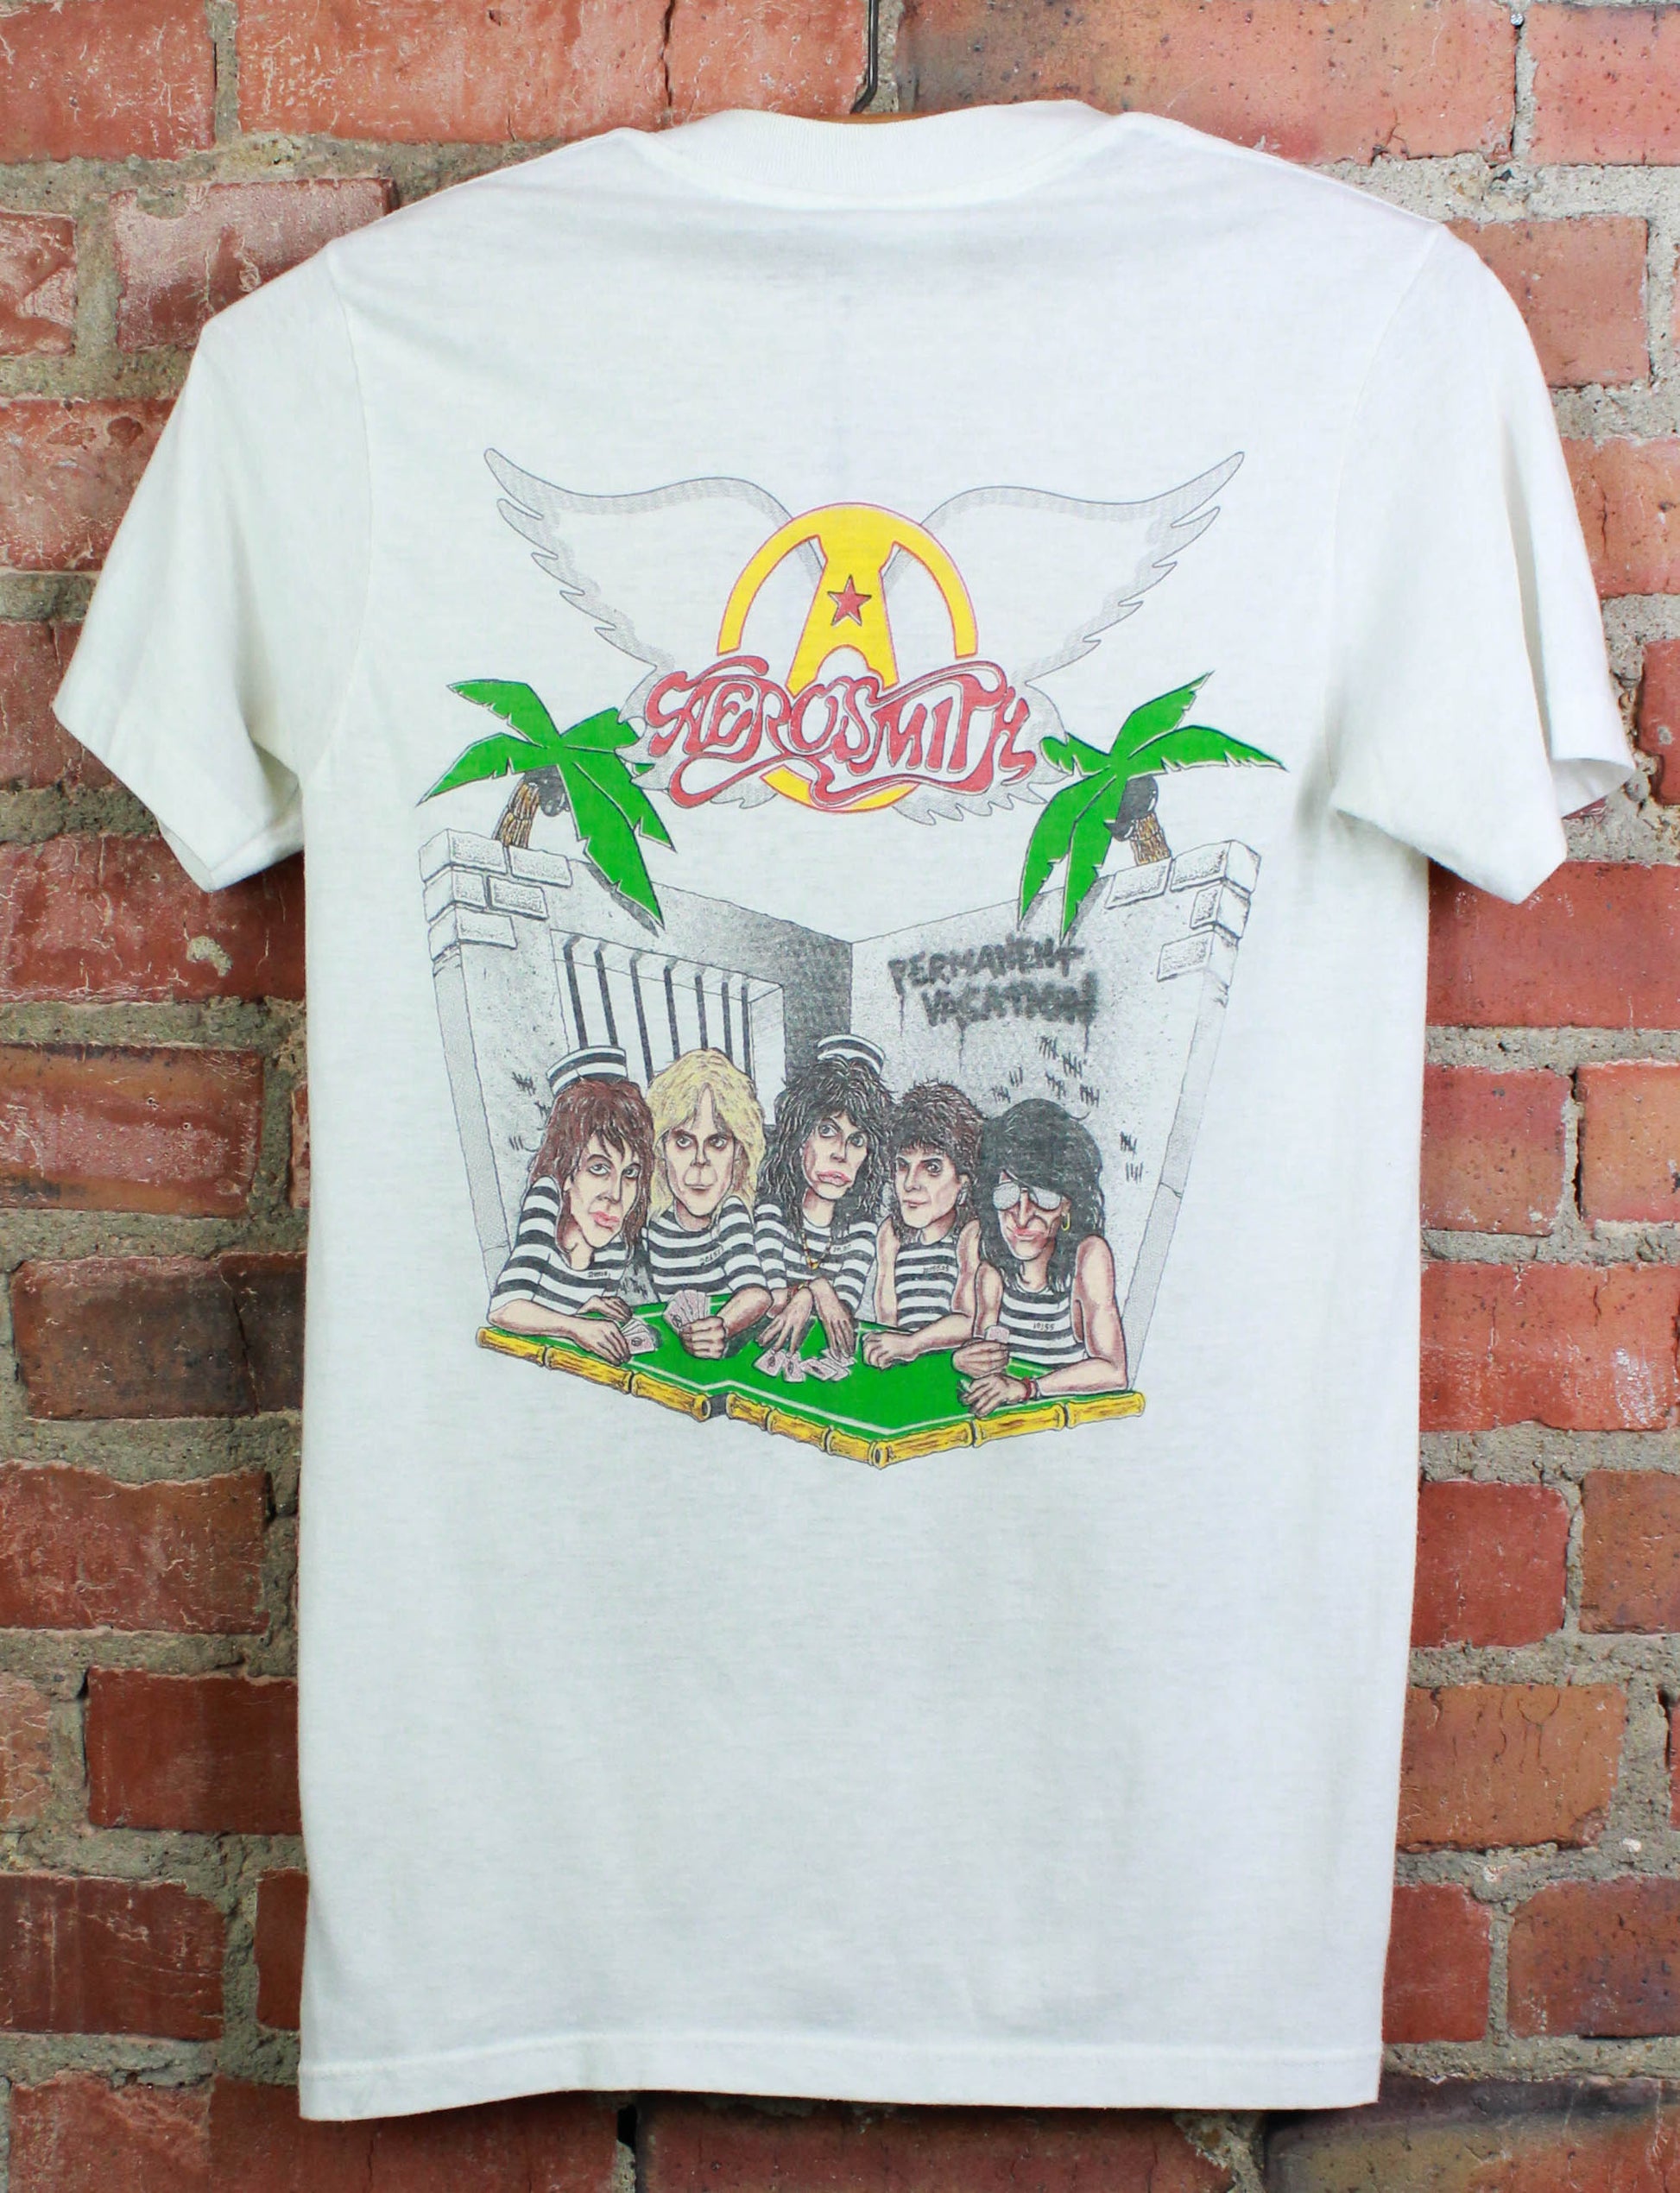 Vintage 1987 Aerosmith Concert T Shirt Permanent Vacation Tour Jail Cell Graphic White Unisex Small/XS